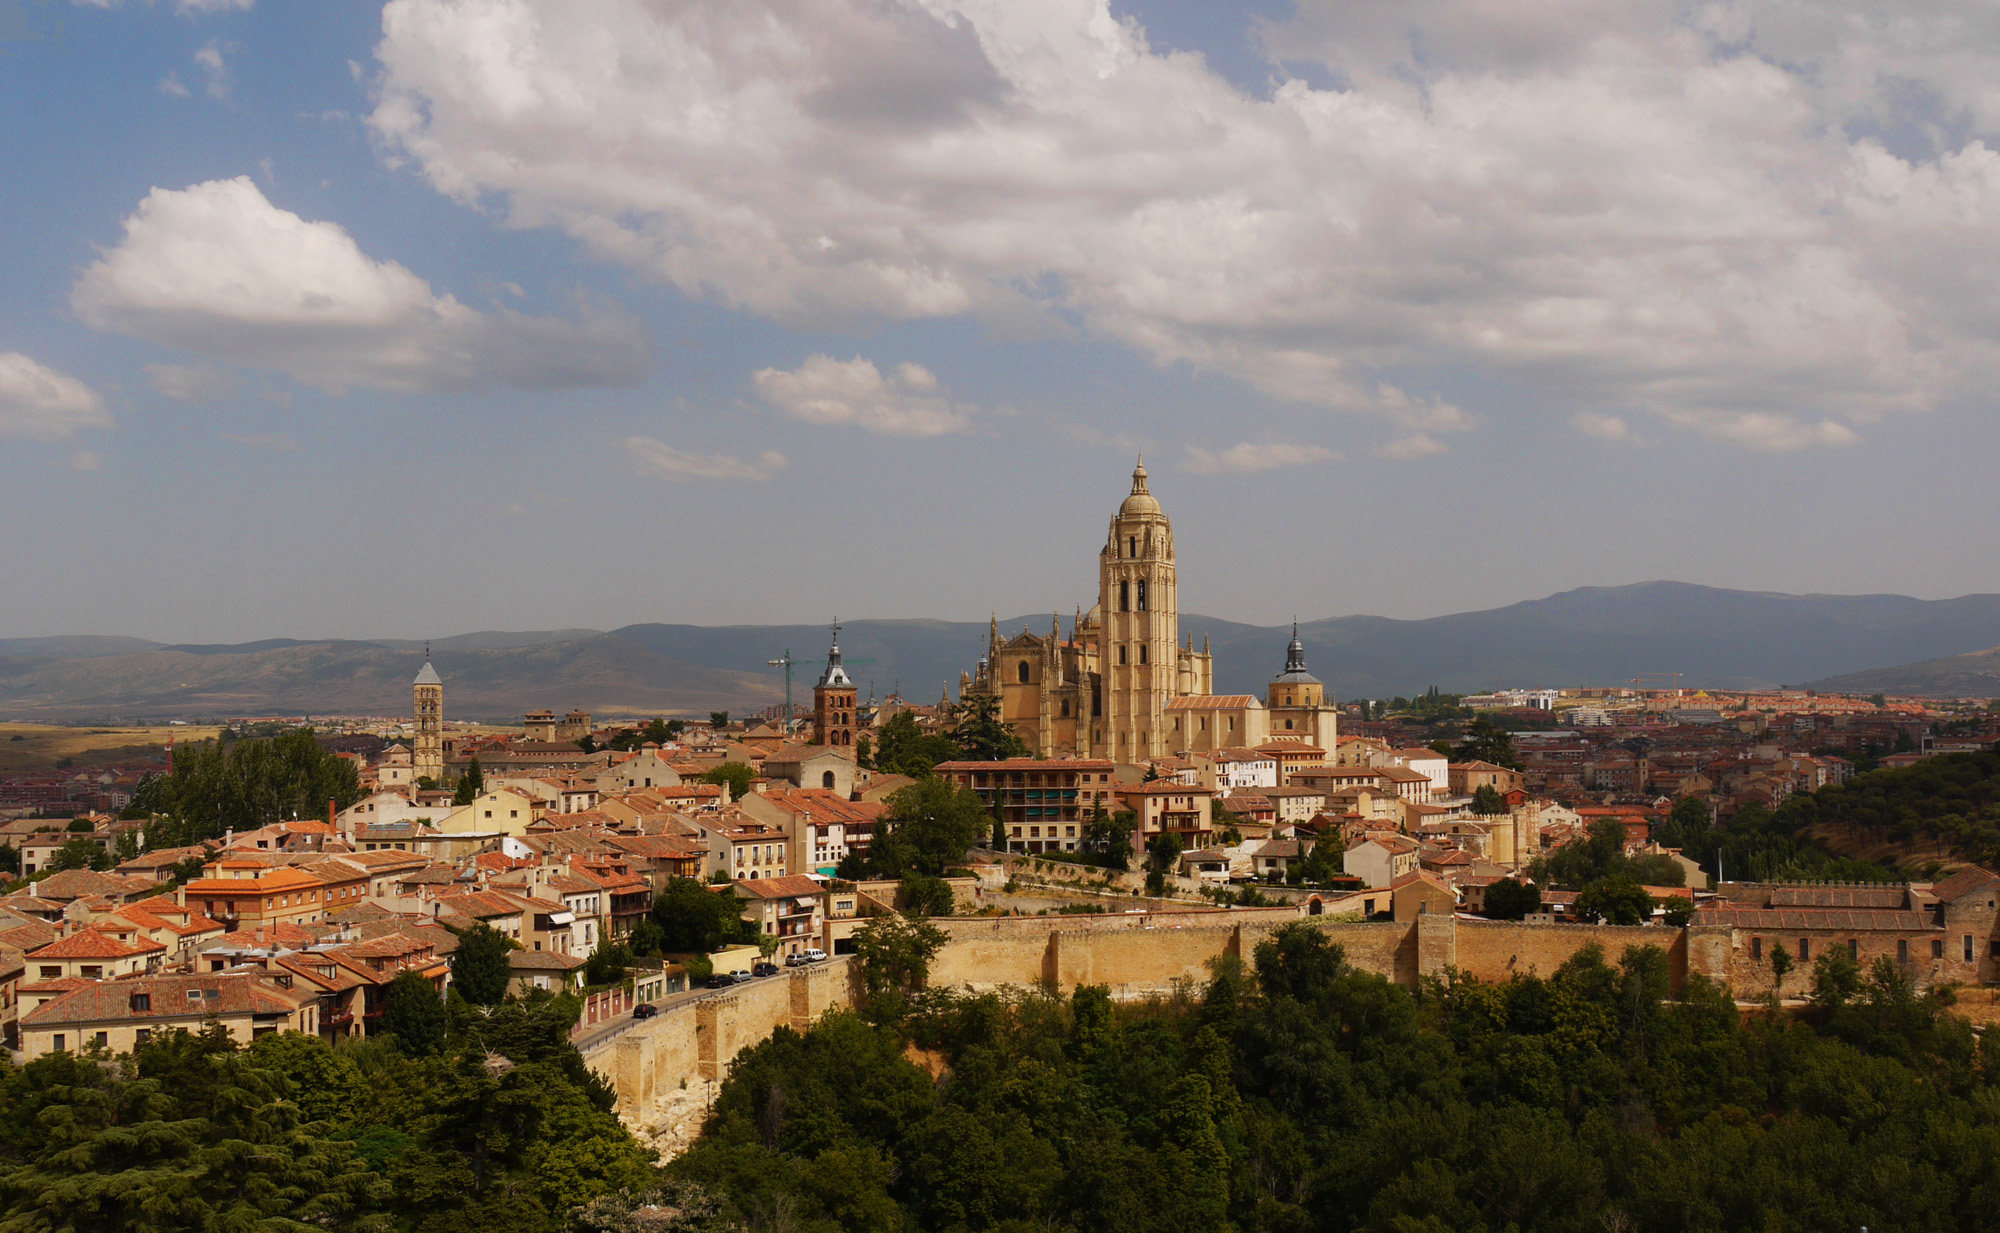 segovia-111-2-cathedral-view-from-alcazar-castle